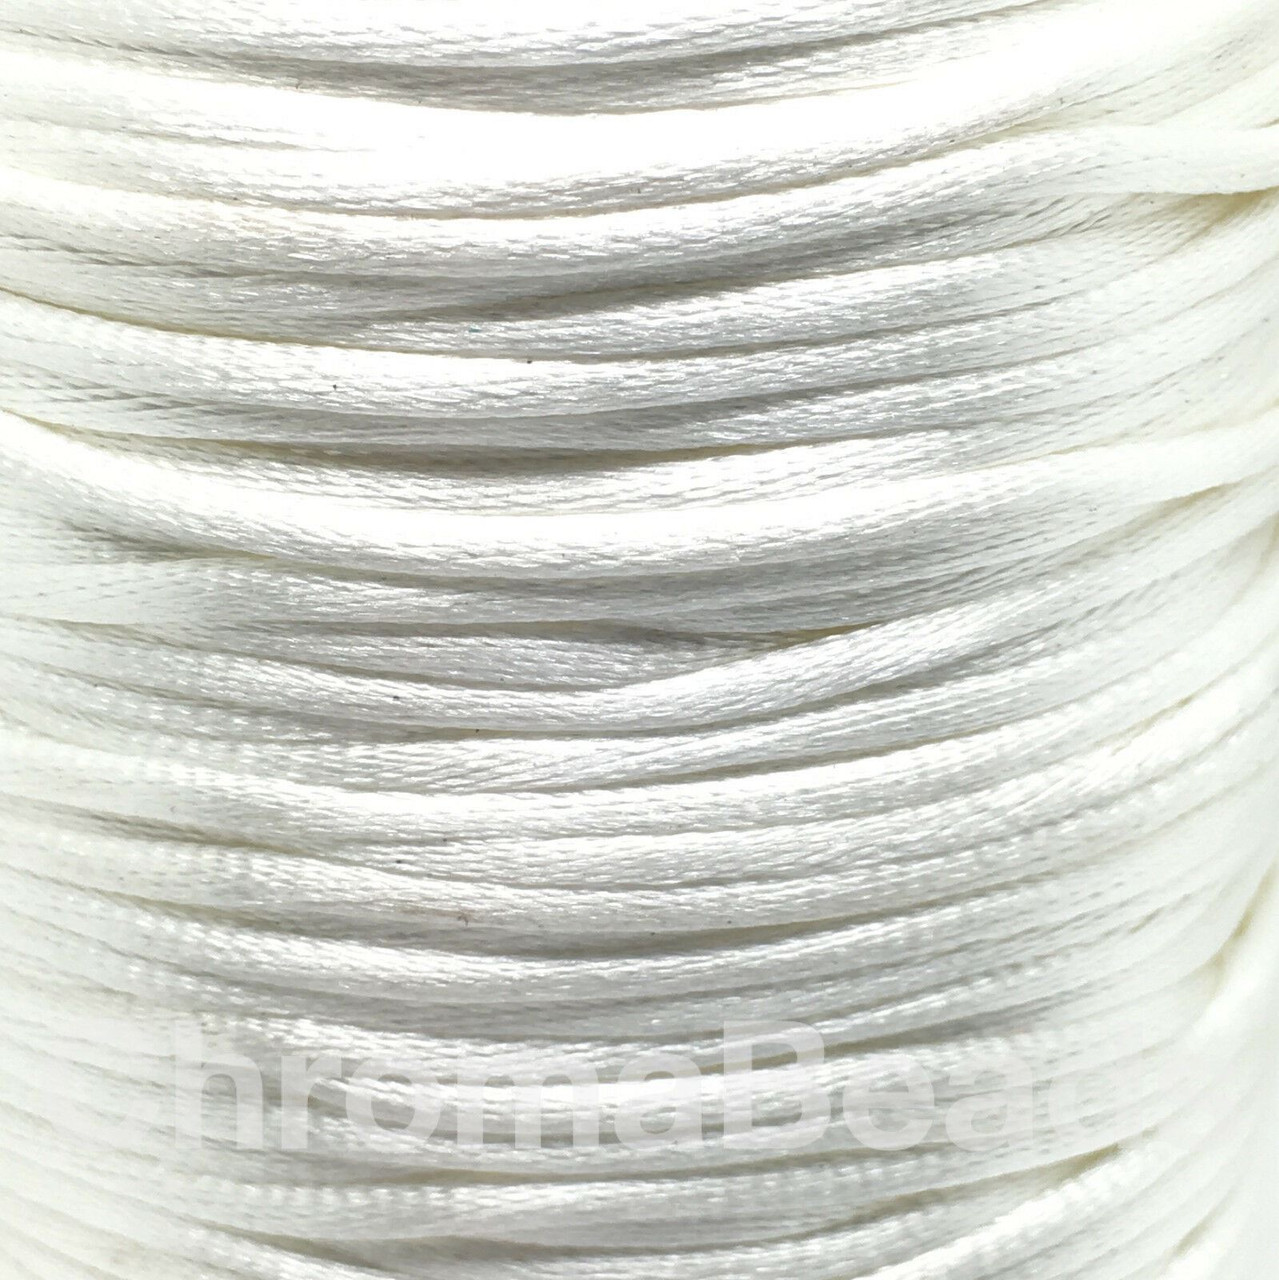 Reel of Nylon Cord (Rattail) - White, approx 90m